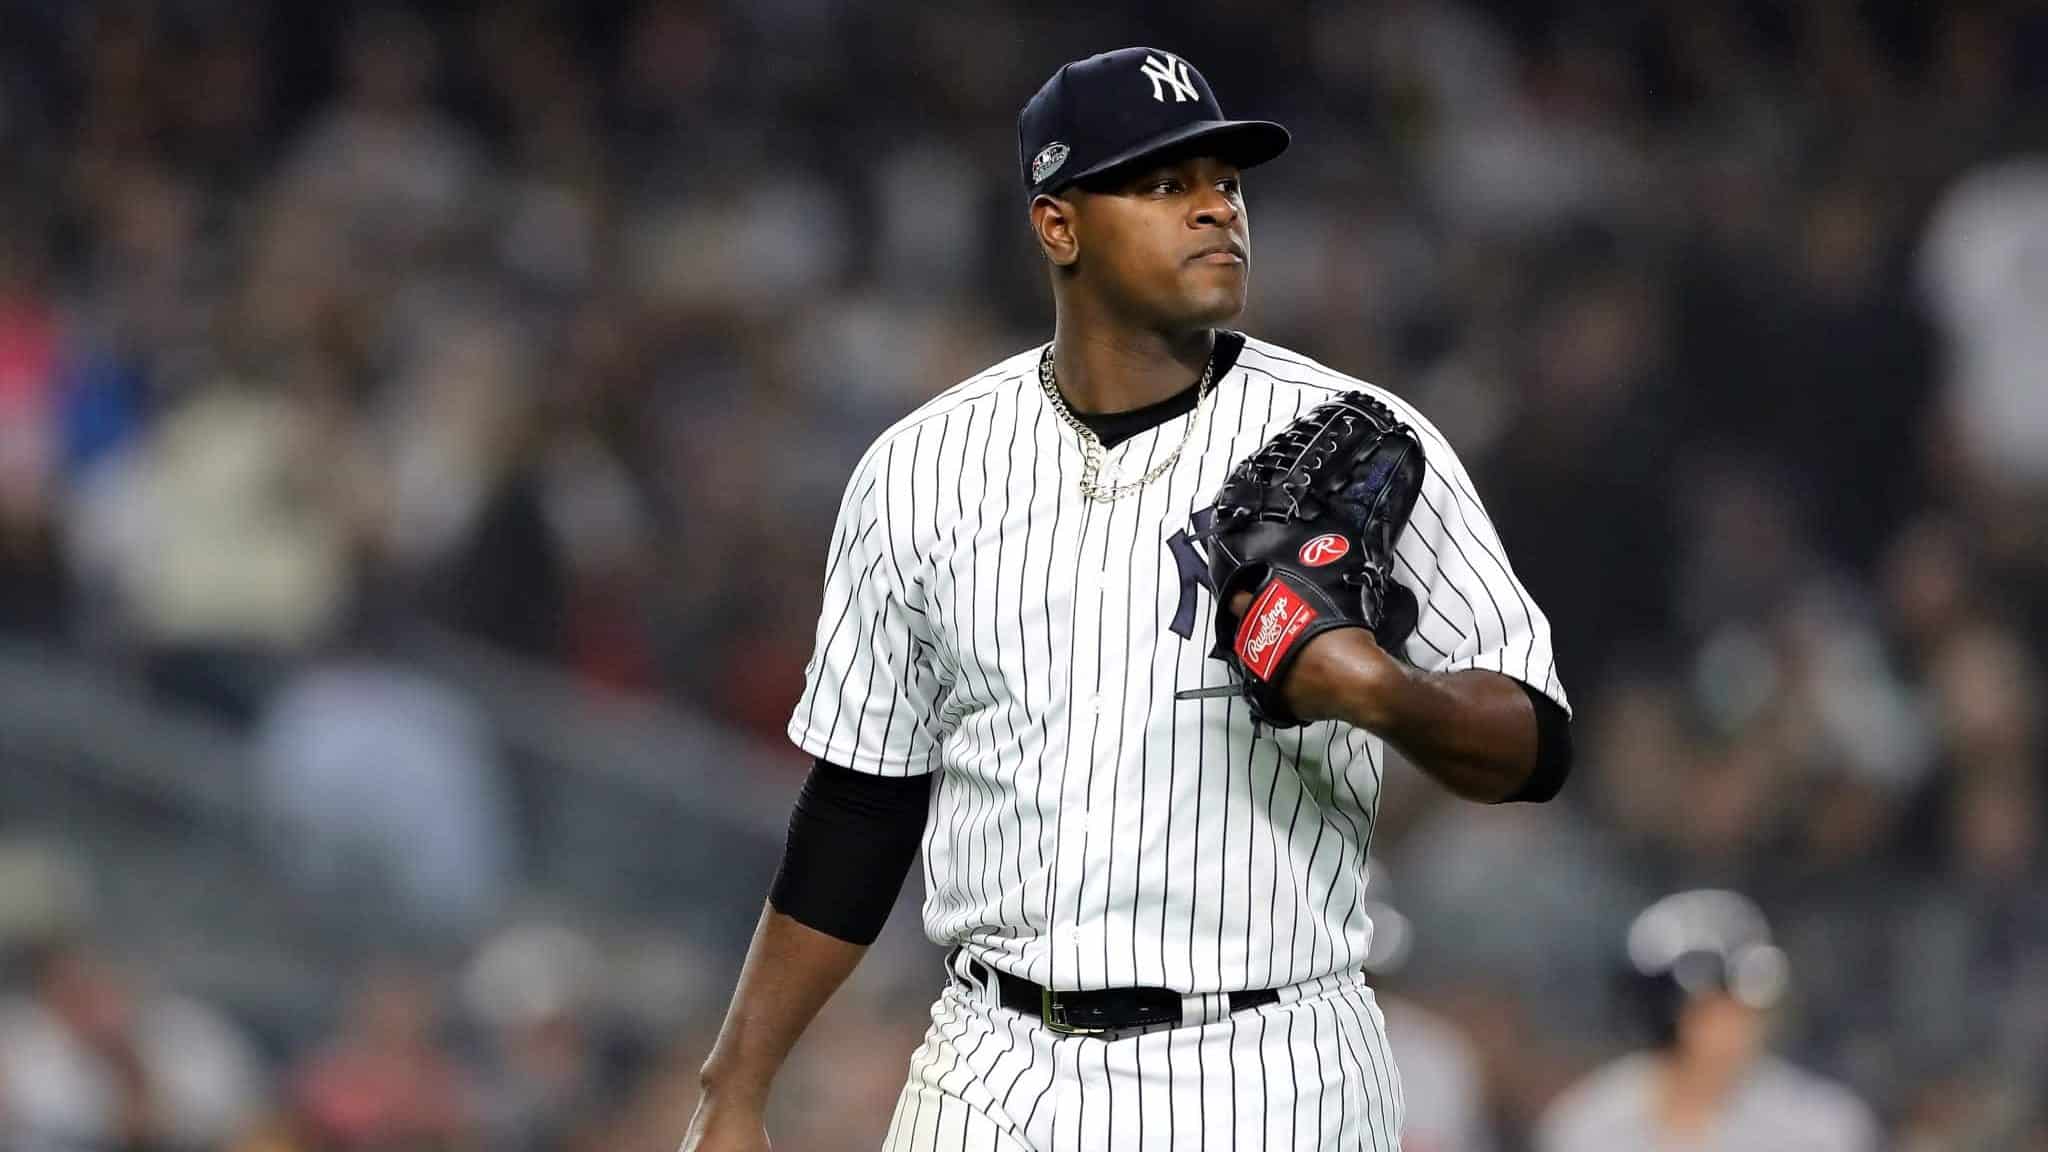 NEW YORK, NEW YORK - OCTOBER 08: Luis Severino #40 of the New York Yankees walks back to the dugout after being pulled against the Boston Red Sox during the fourth inning in Game Three of the American League Division Series at Yankee Stadium on October 08, 2018 in the Bronx borough of New York City.